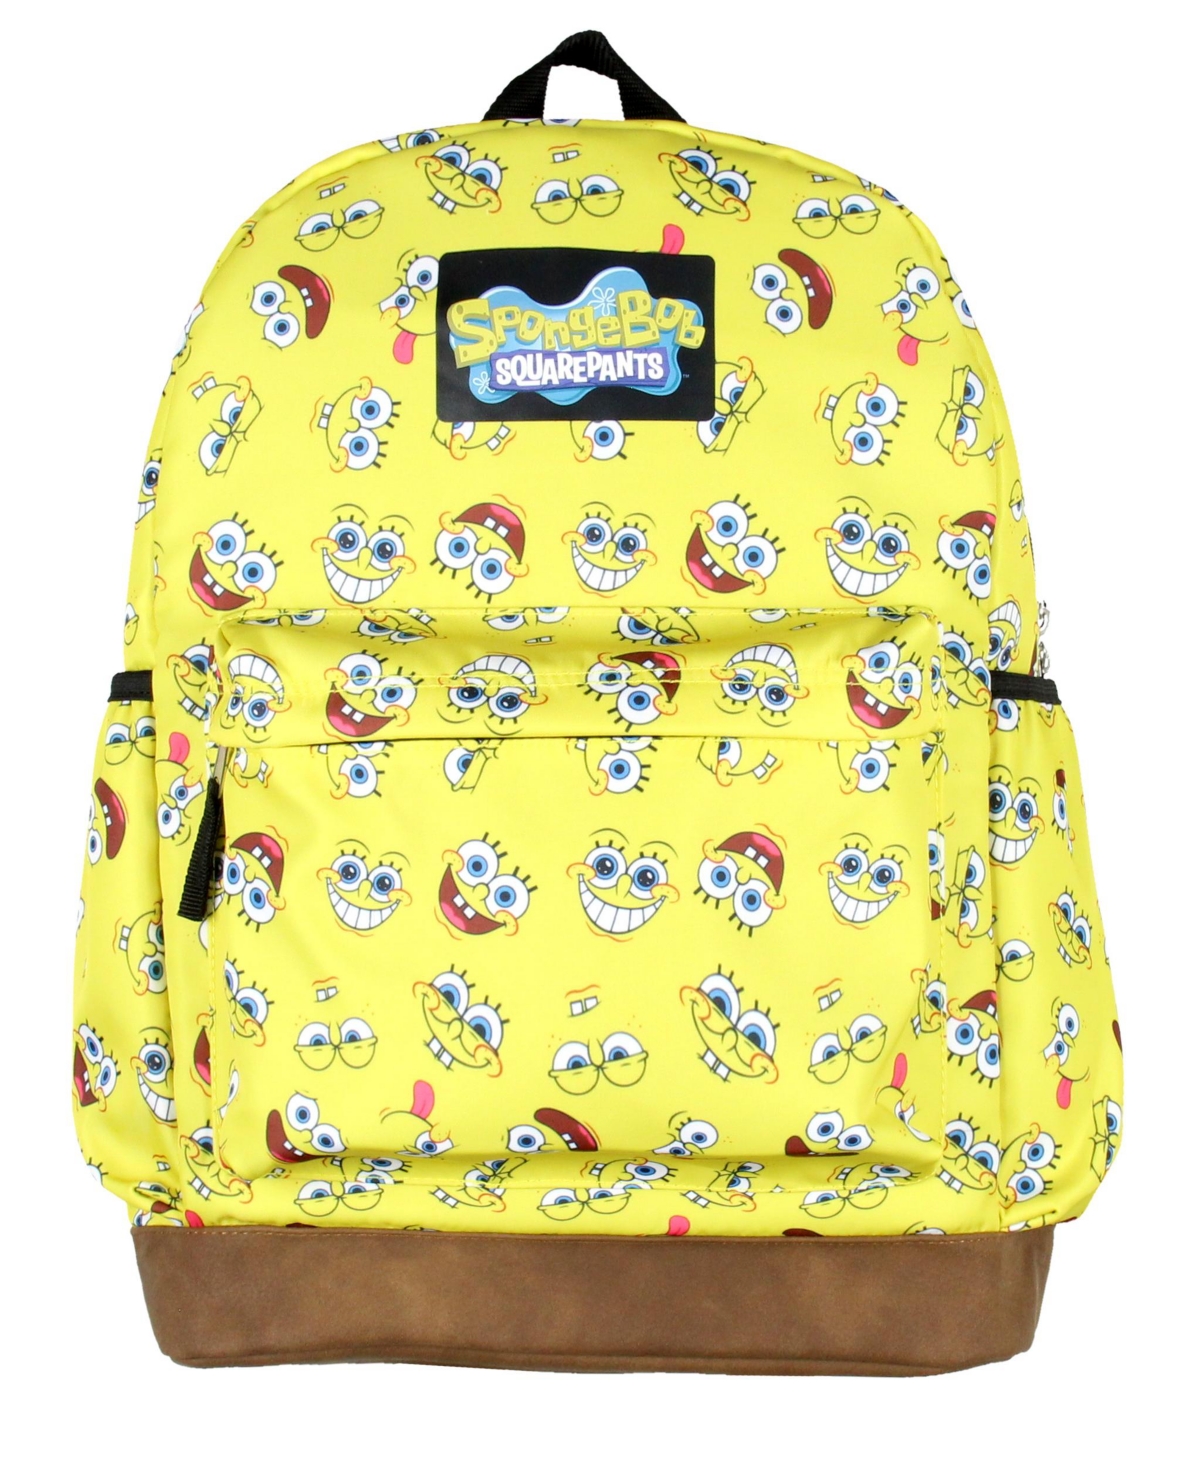 Nickelodeon SpongeBob SquarePants Face Expressions All Over Print Backpack - Yellow